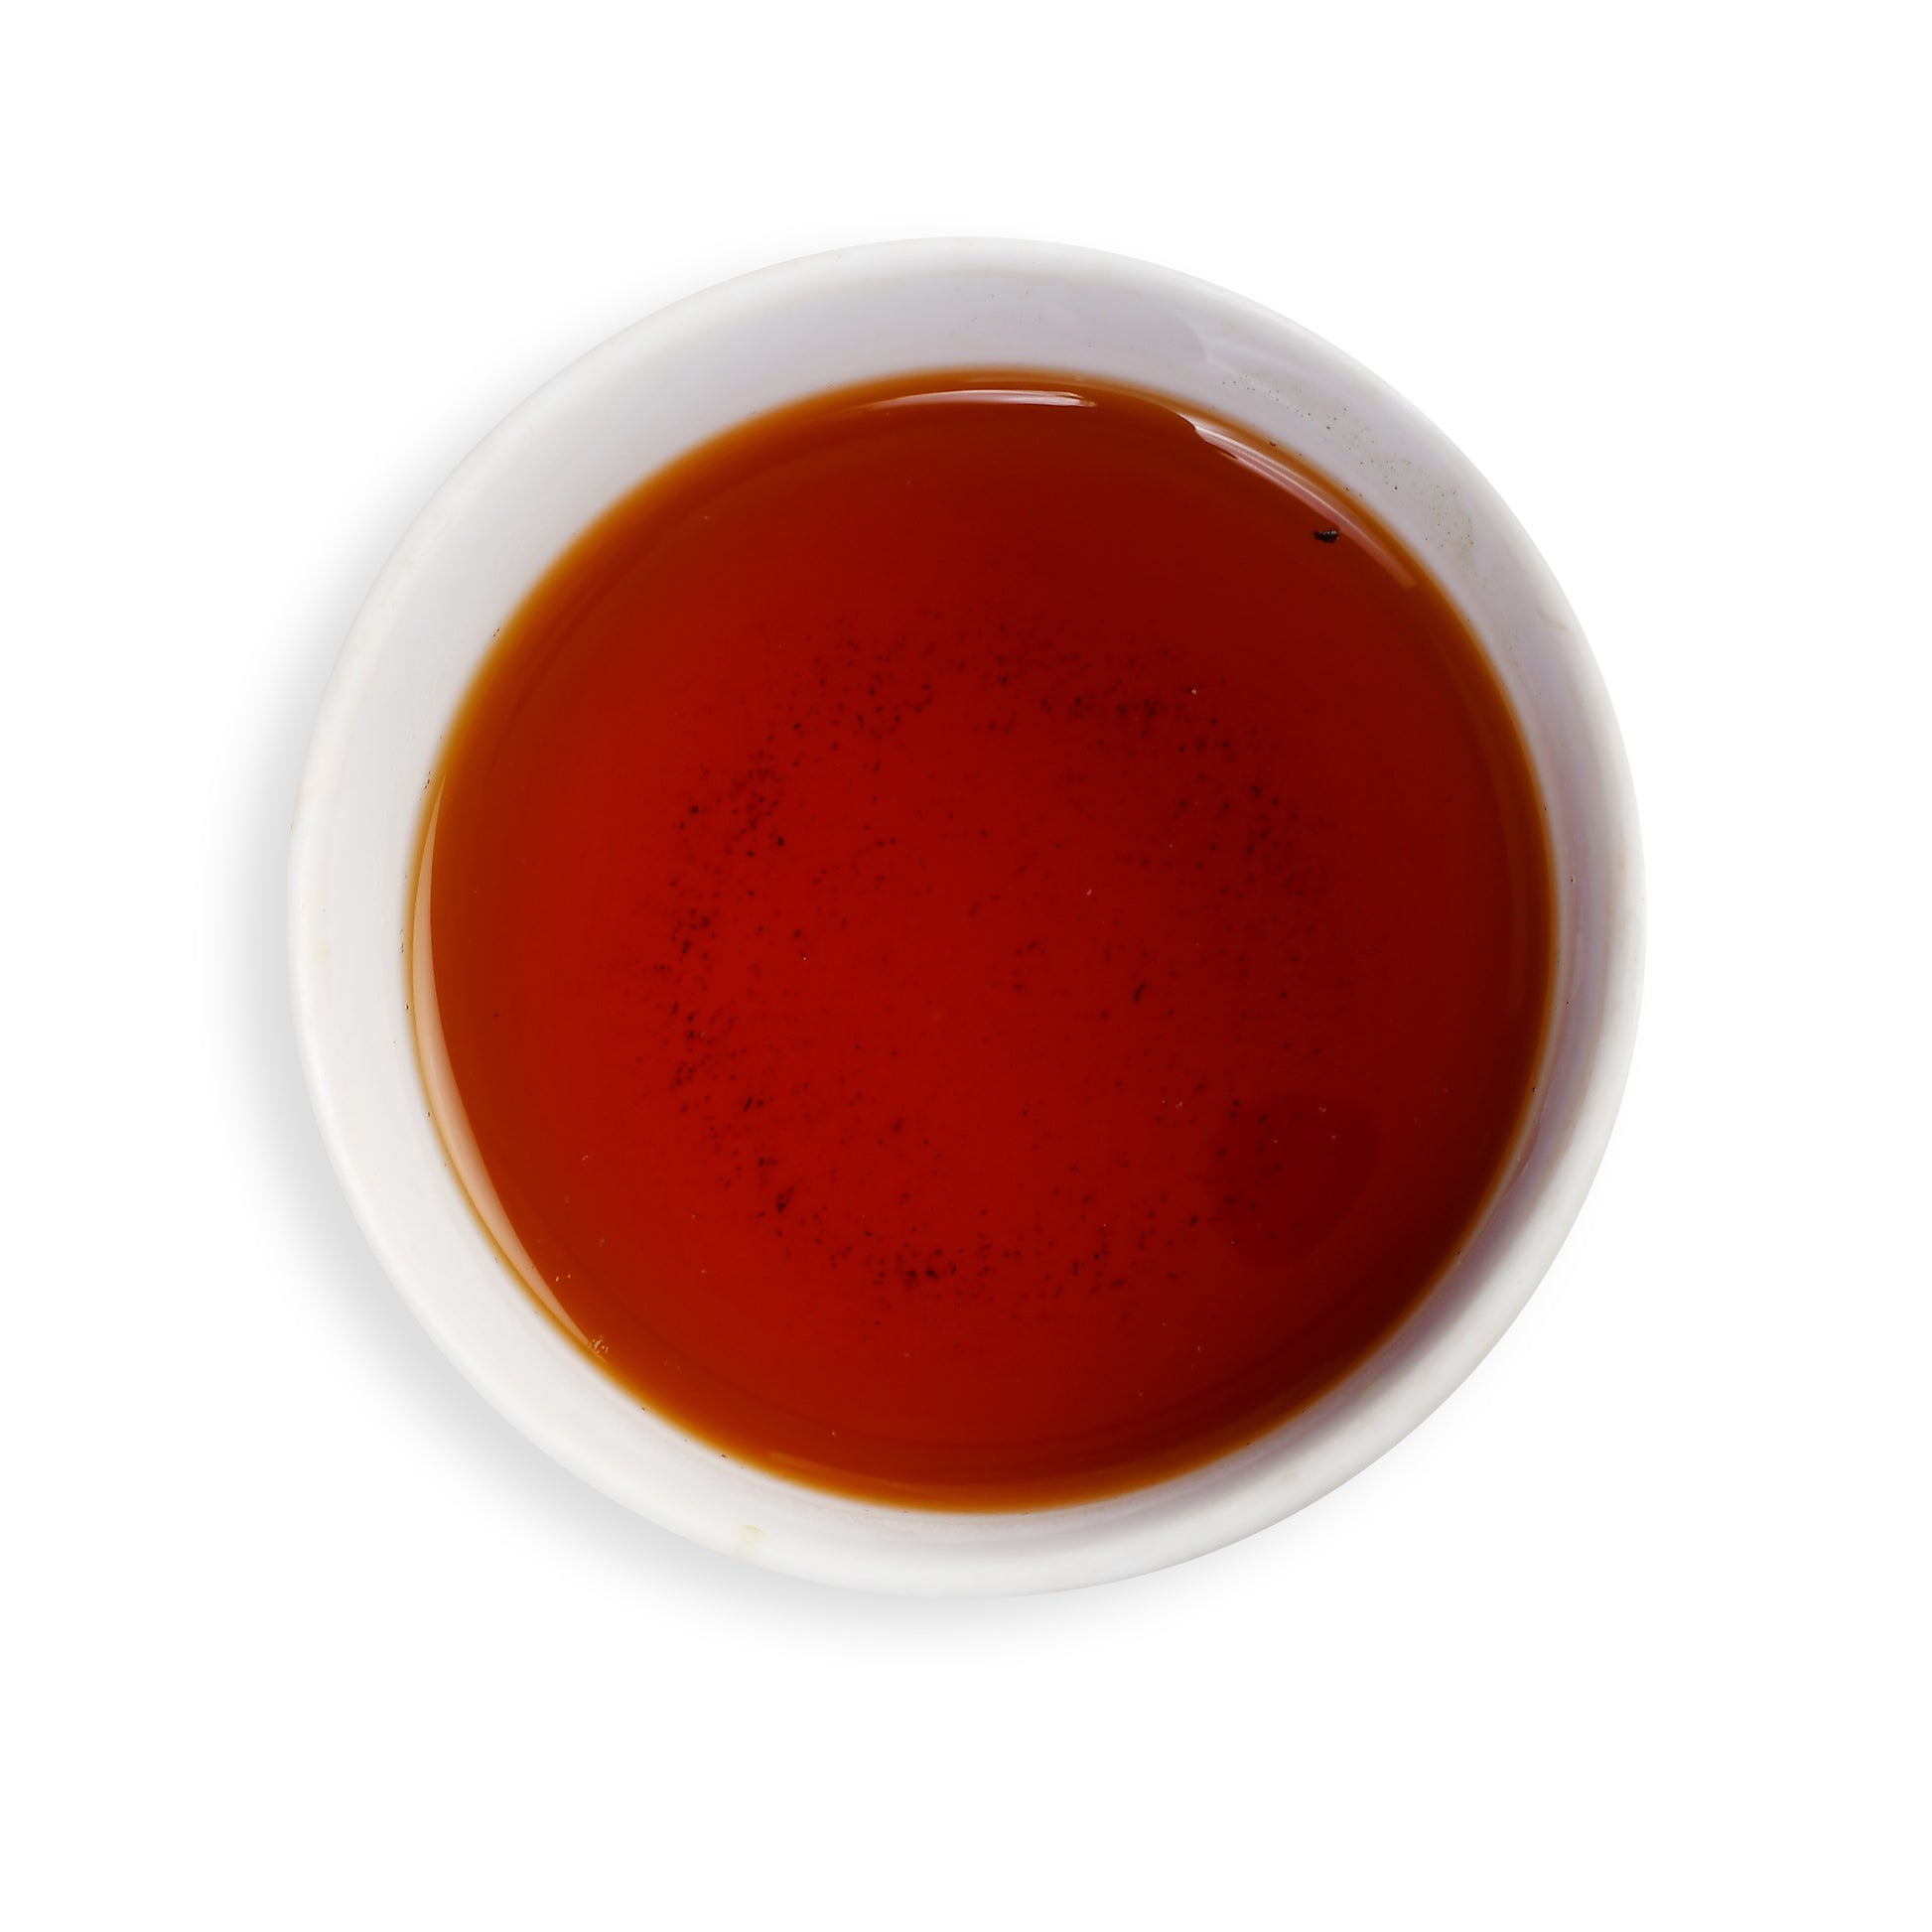 South African Rooibos. - Mittal Teas